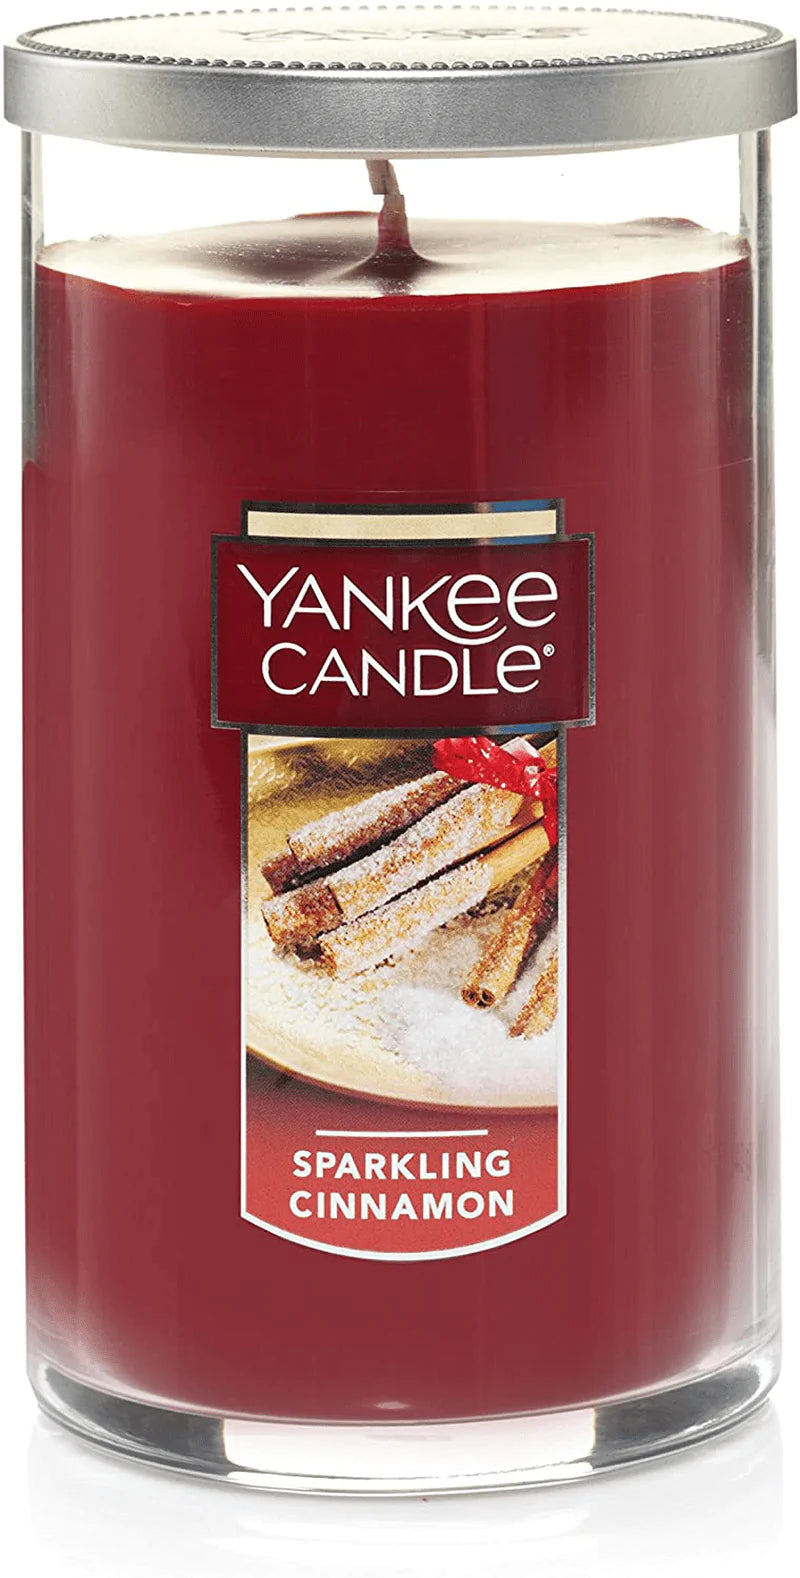 Yankee Candle Large Jar Candle Home Sweet Home Home & Garden > Decor > Home Fragrances > Candles Yankee Candle Sparkling Cinnamon Medium Perfect Pillar 